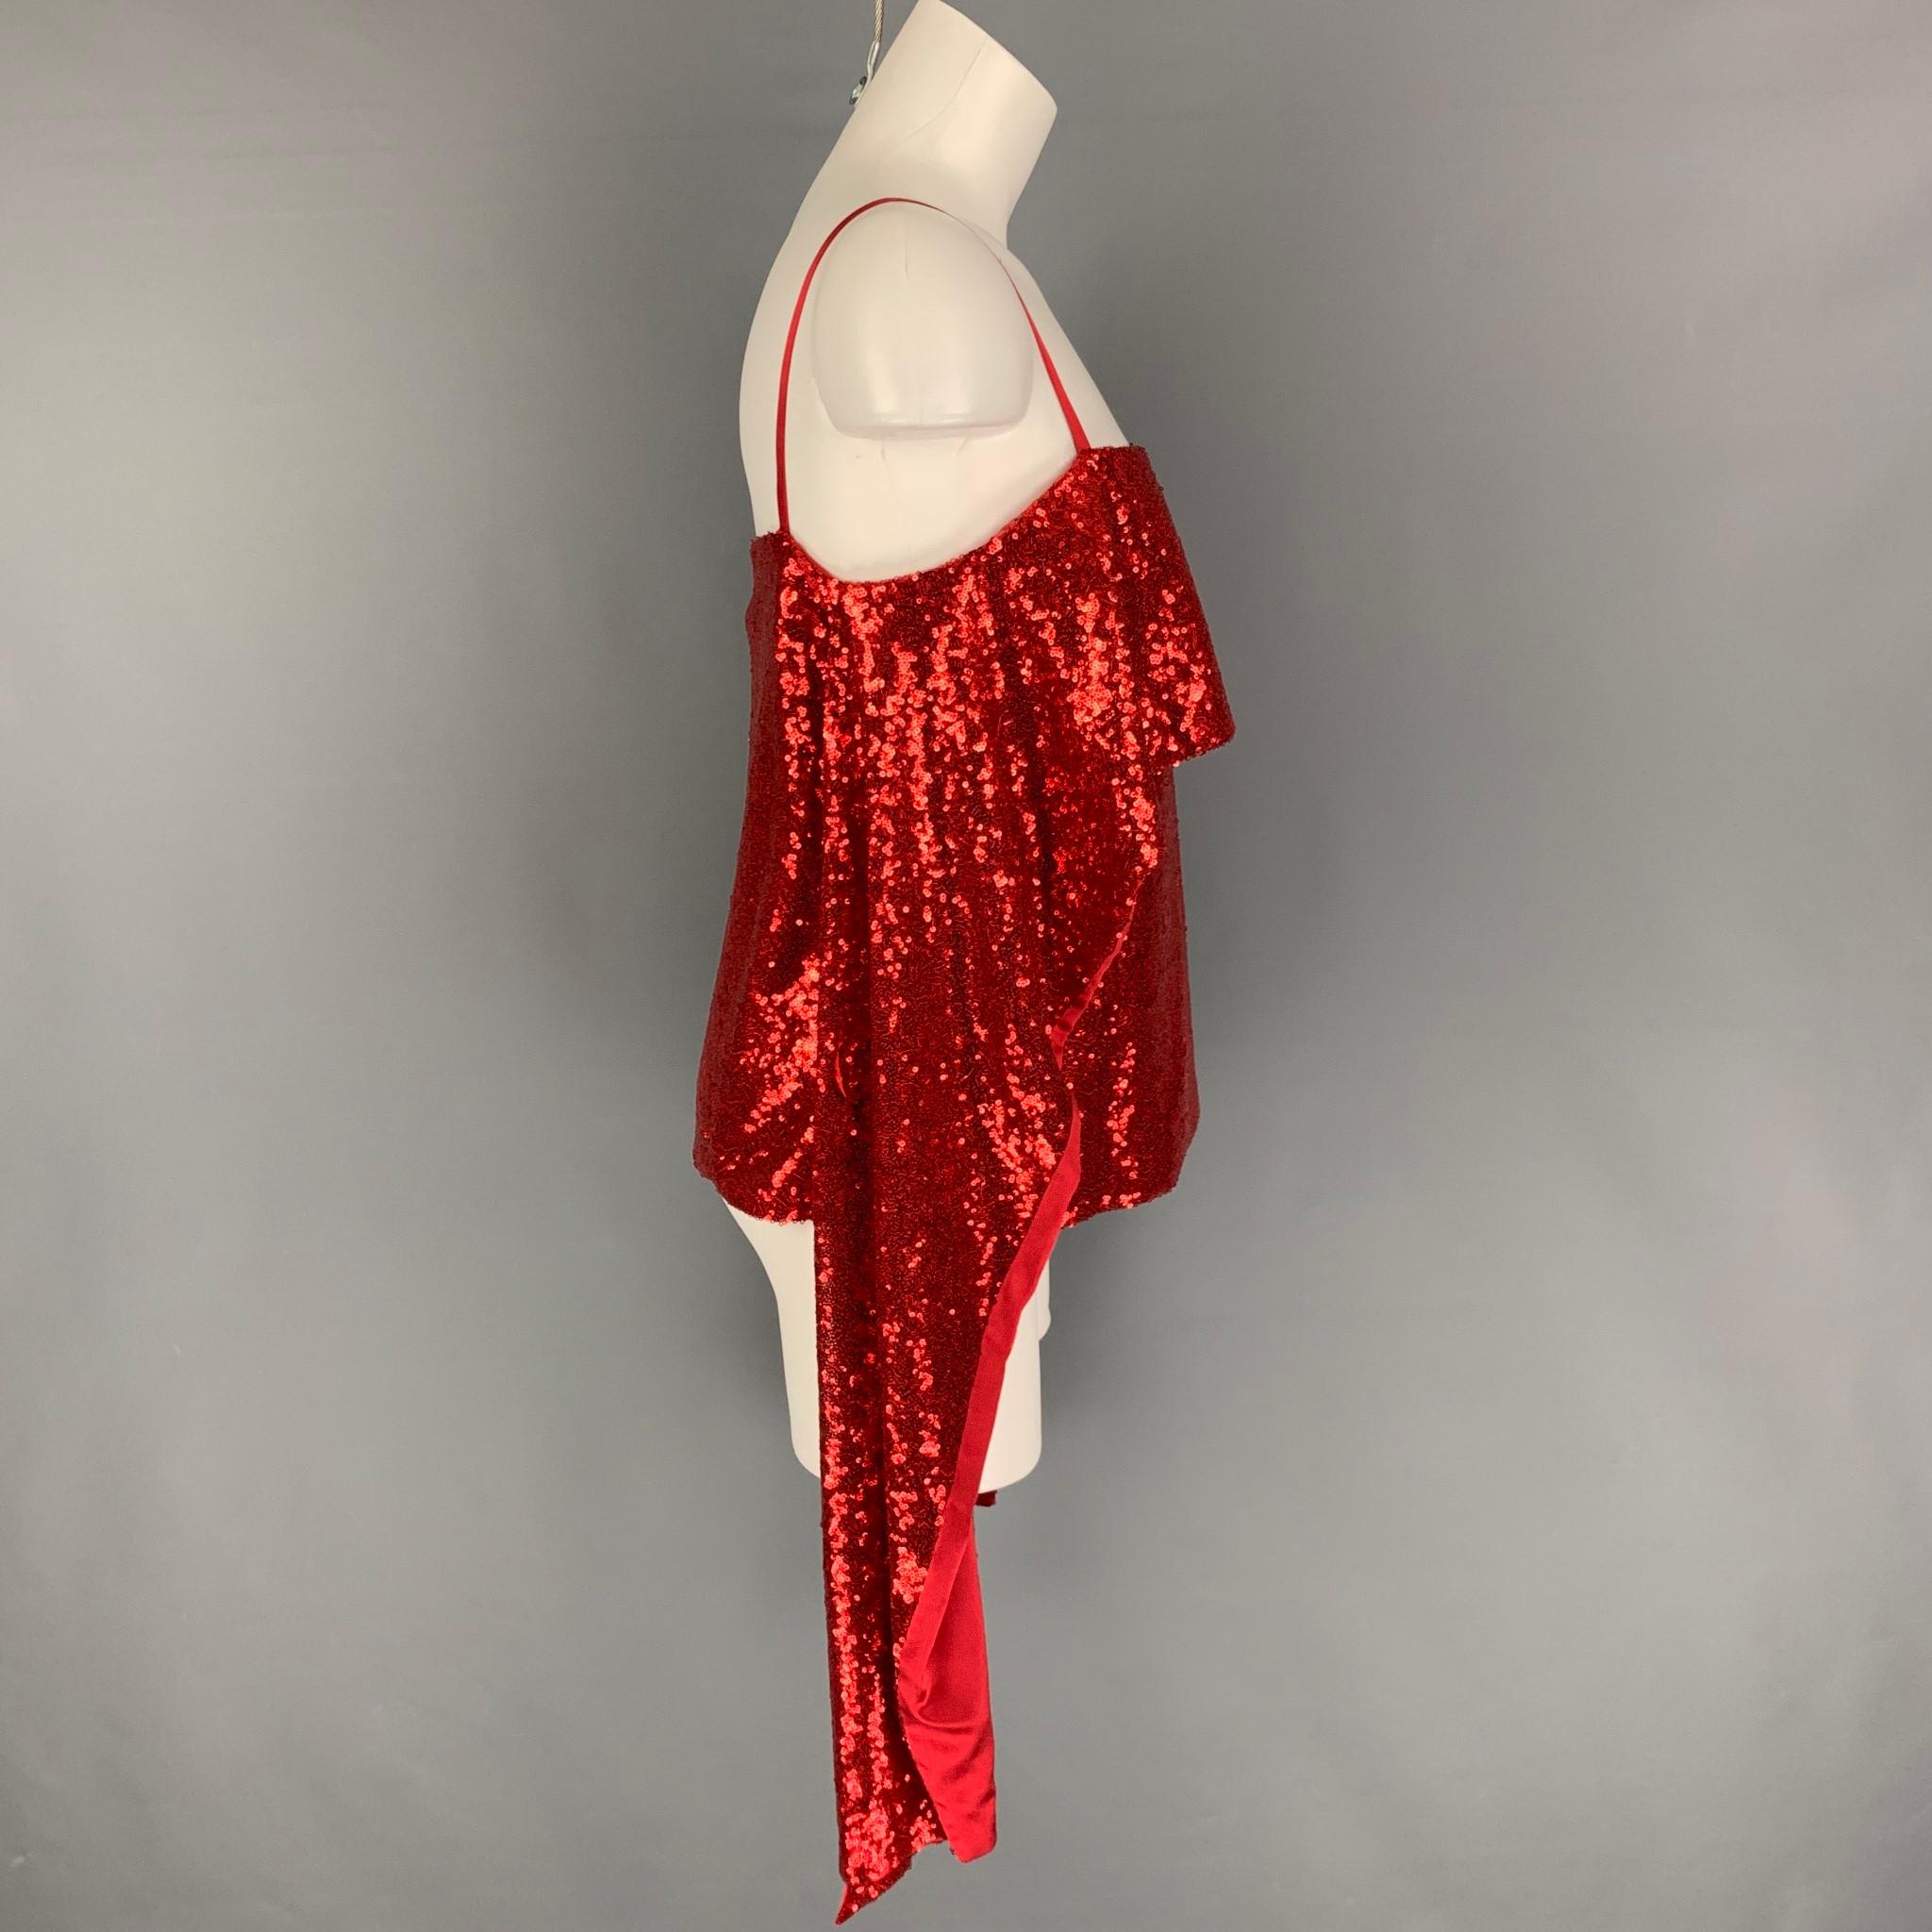 PRABAL GURUNG dress top comes in a red sequined polyester featuring a long draped strap design, side slits, and spaghetti straps. Made in USA.

New With Tags. 
Marked: 2

Measurements:

Bust: 34 in.
Length: 15 in. 